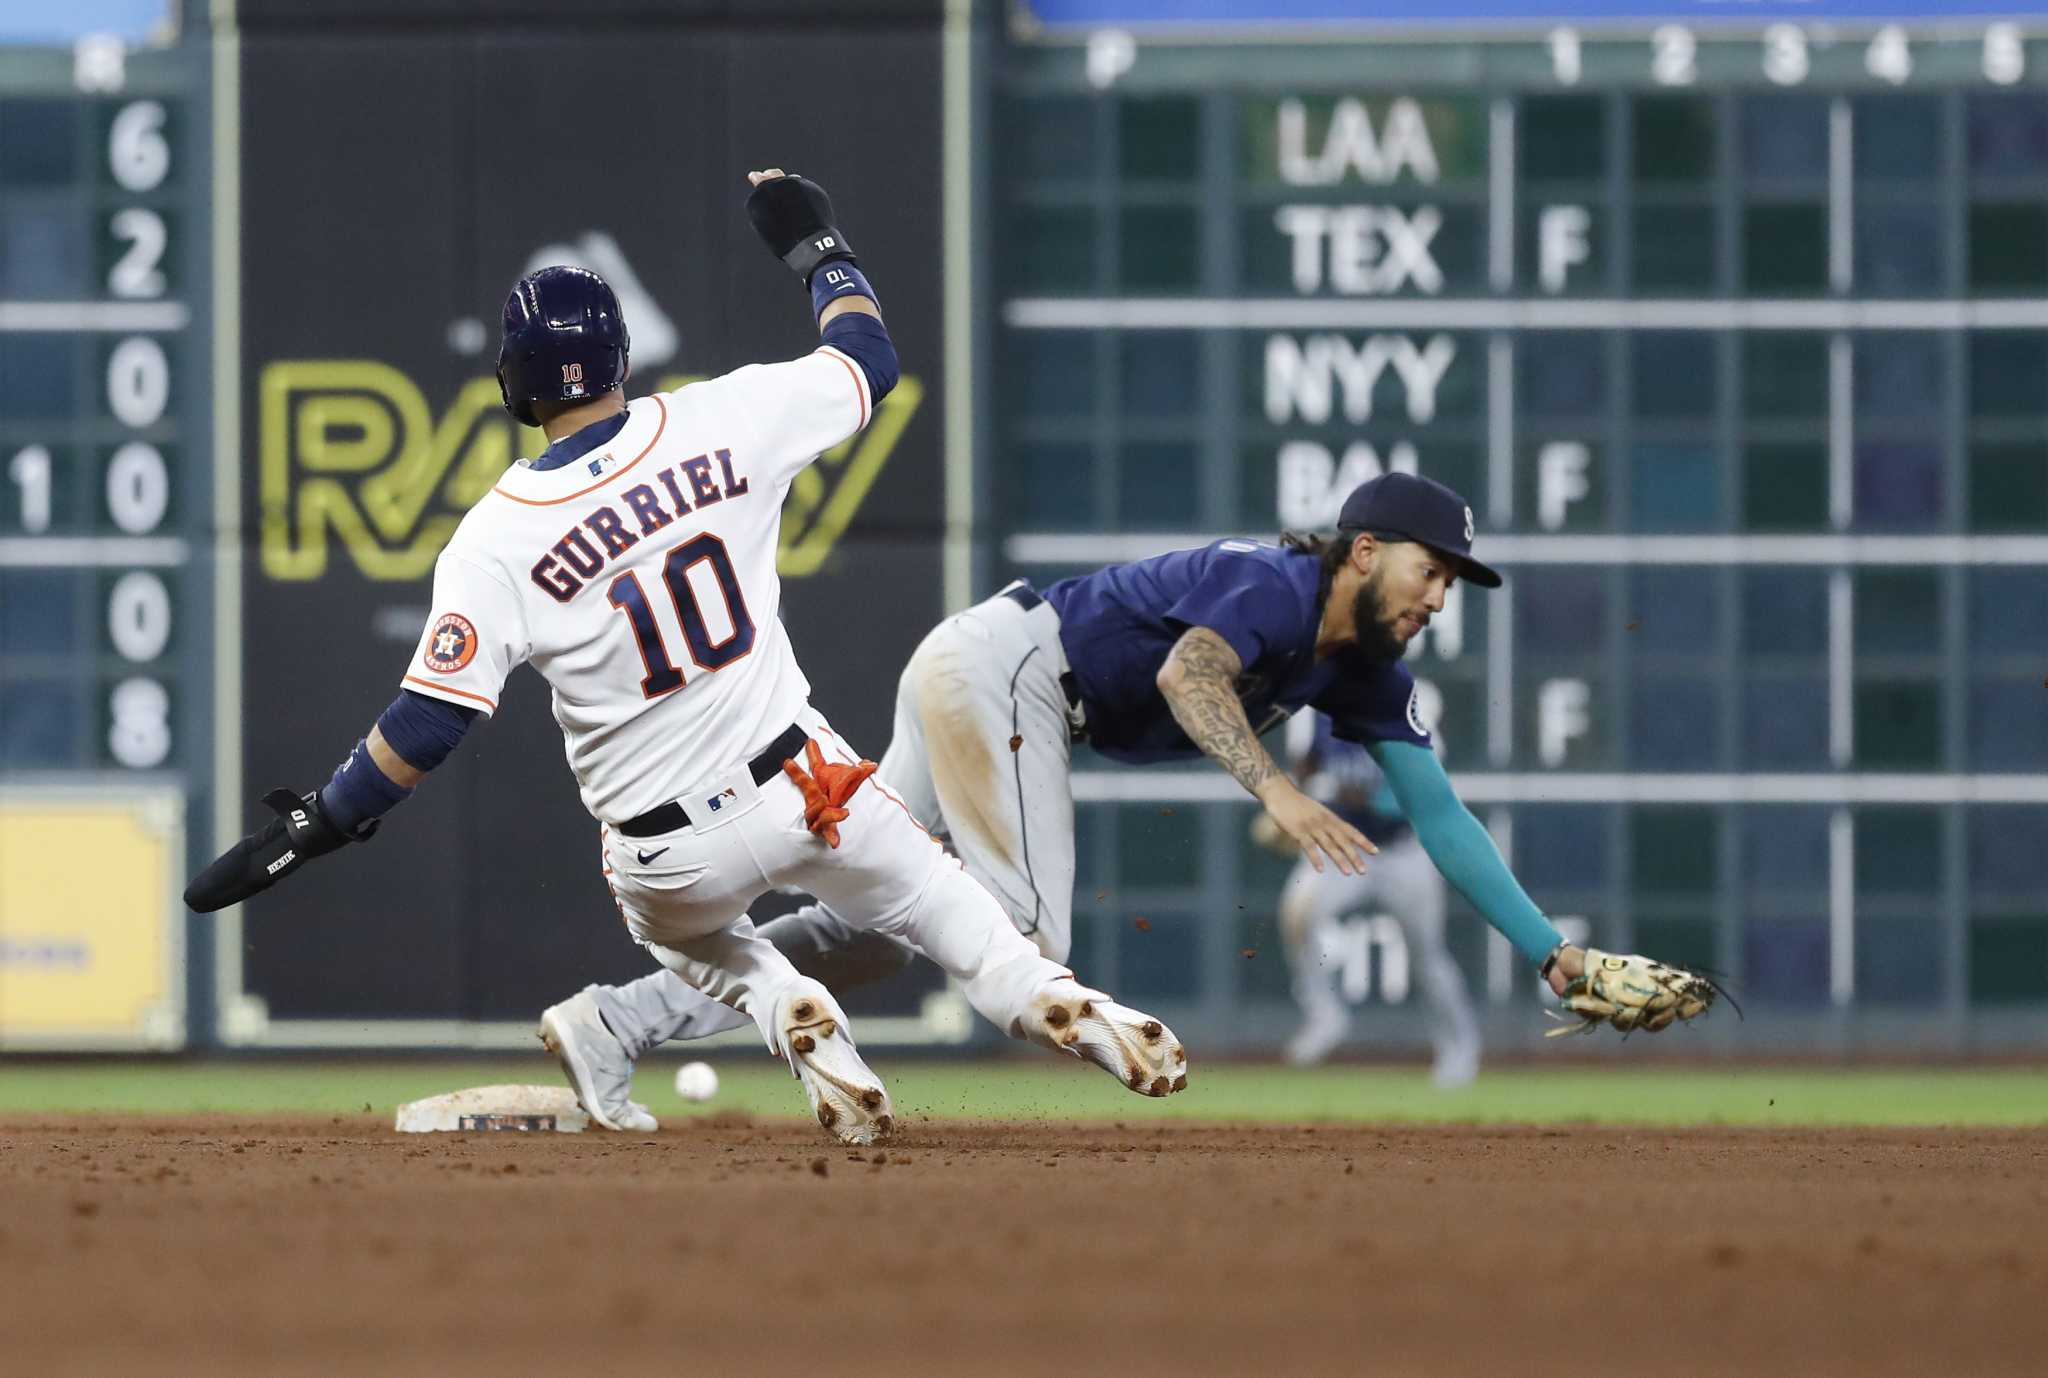 Houston Astros advance to 2nd World Series in 3 years - ABC13 Houston